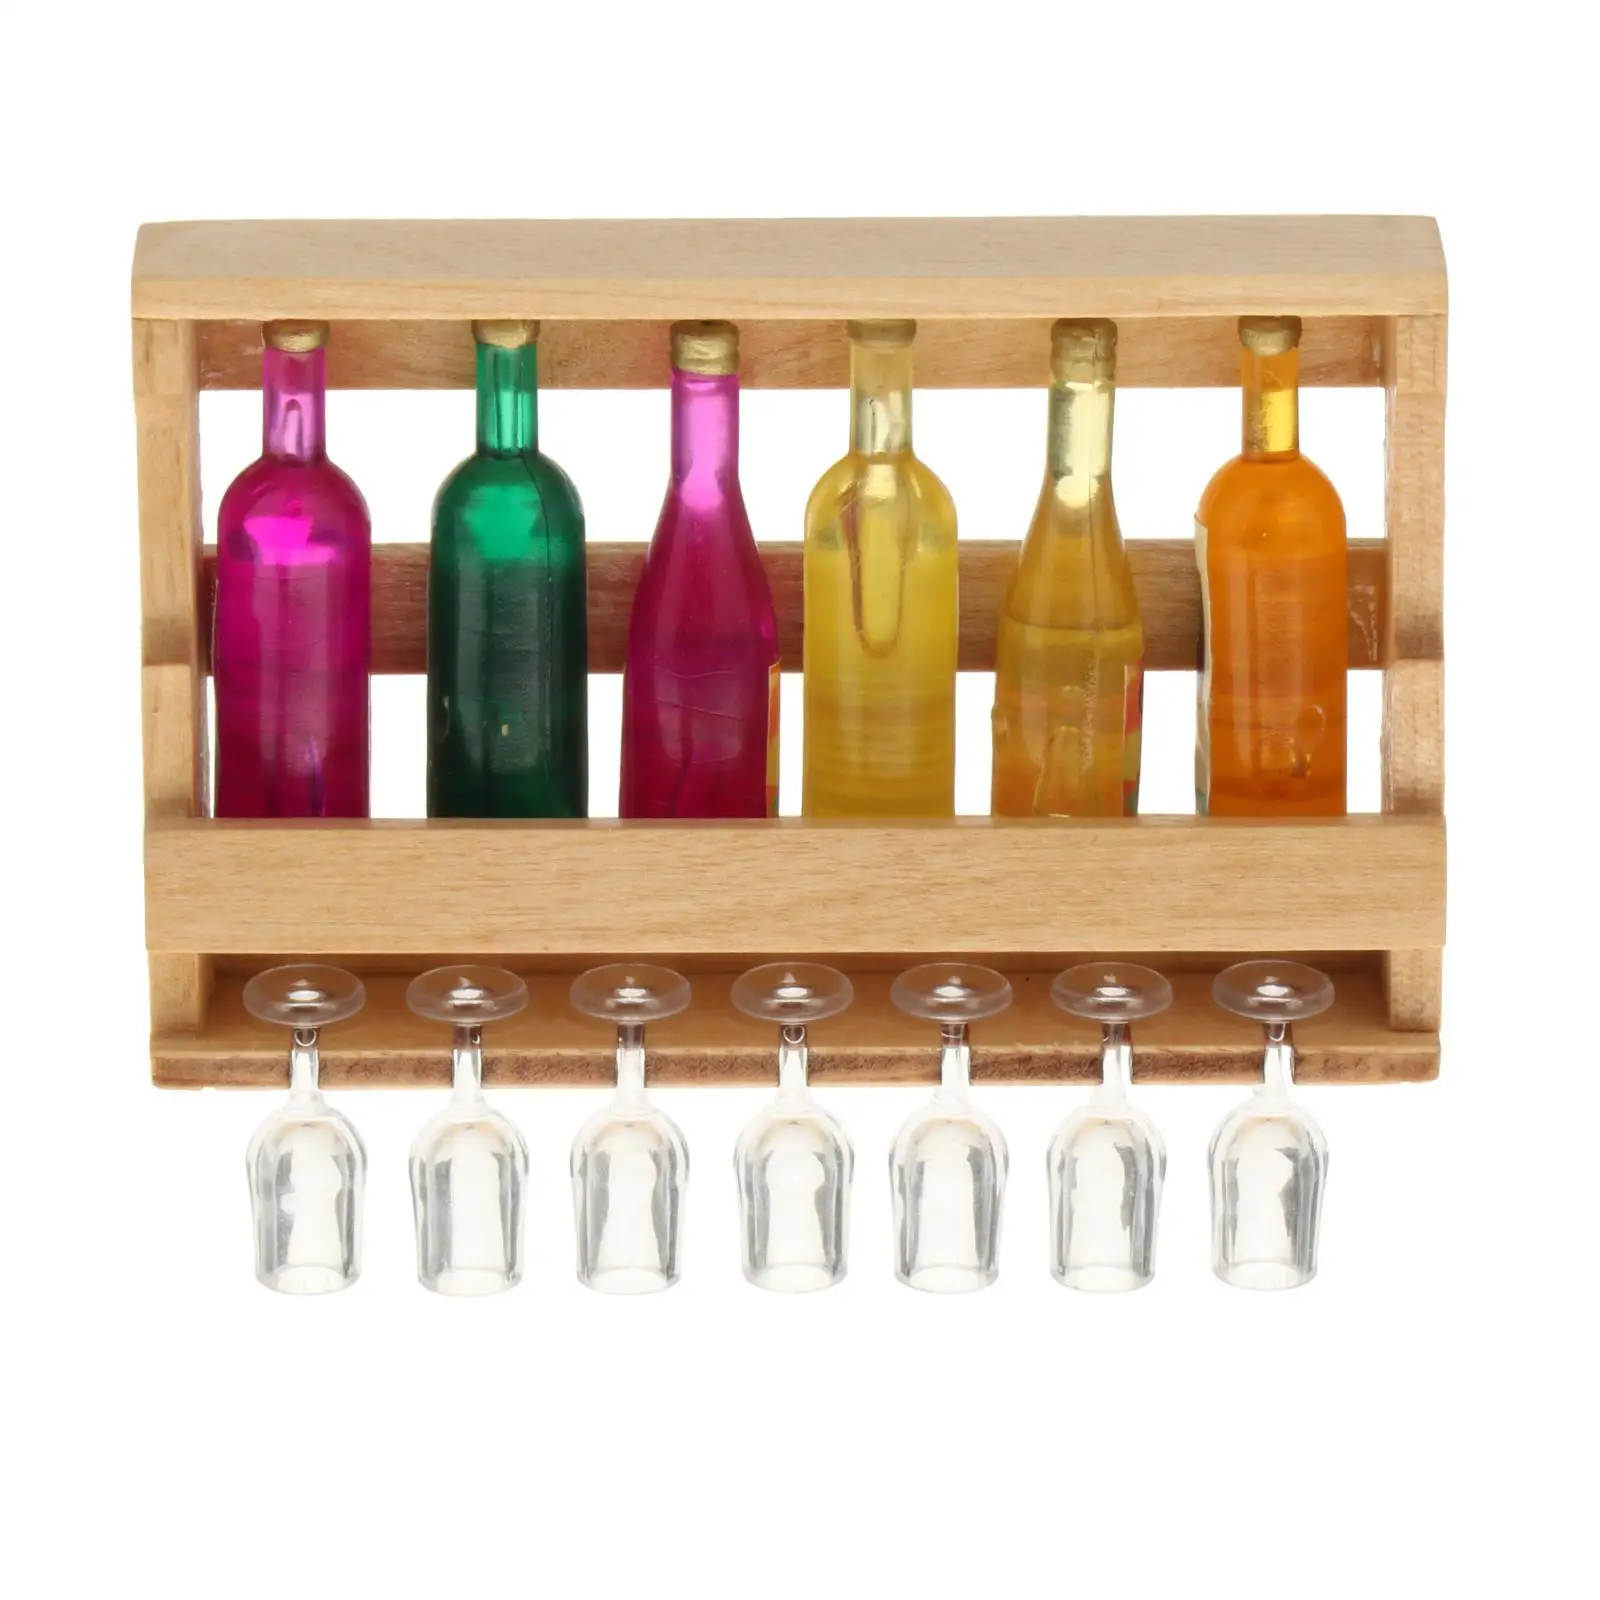 14 Pieces 1/12 Scale Miniature Wine Rack with Bottles and Glass Cup Toys Pretend